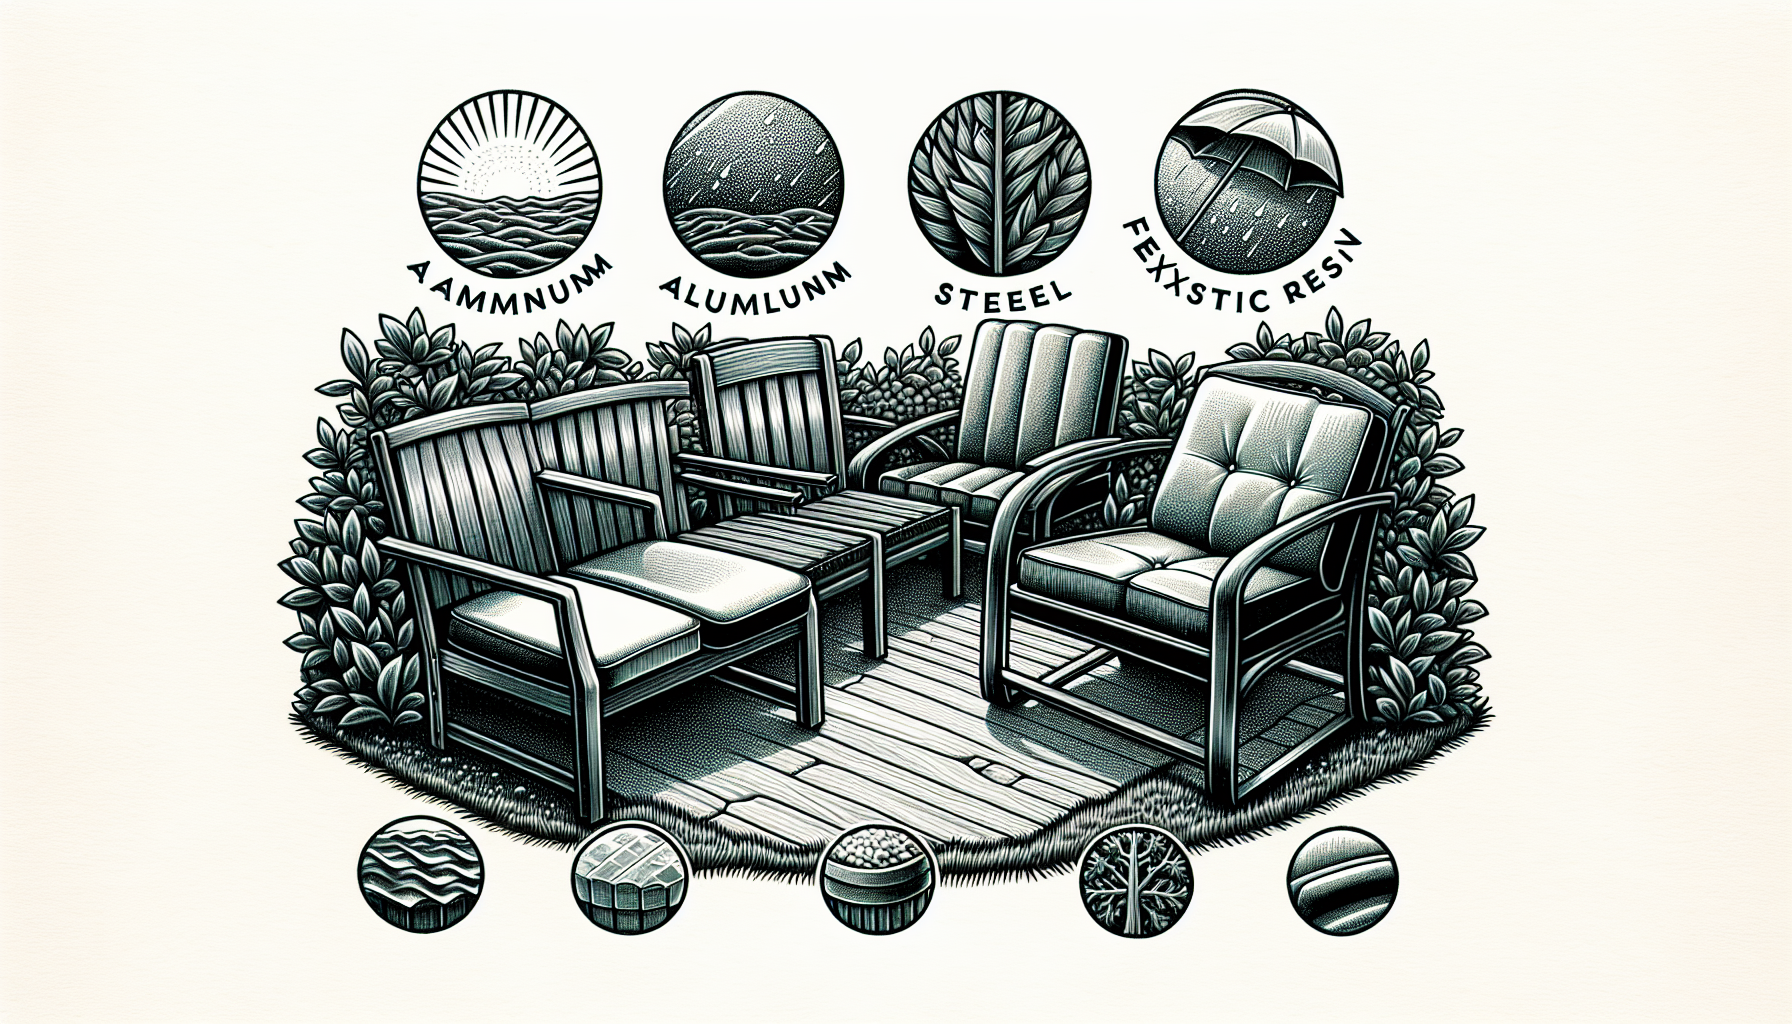 Illustration of various outdoor furniture materials